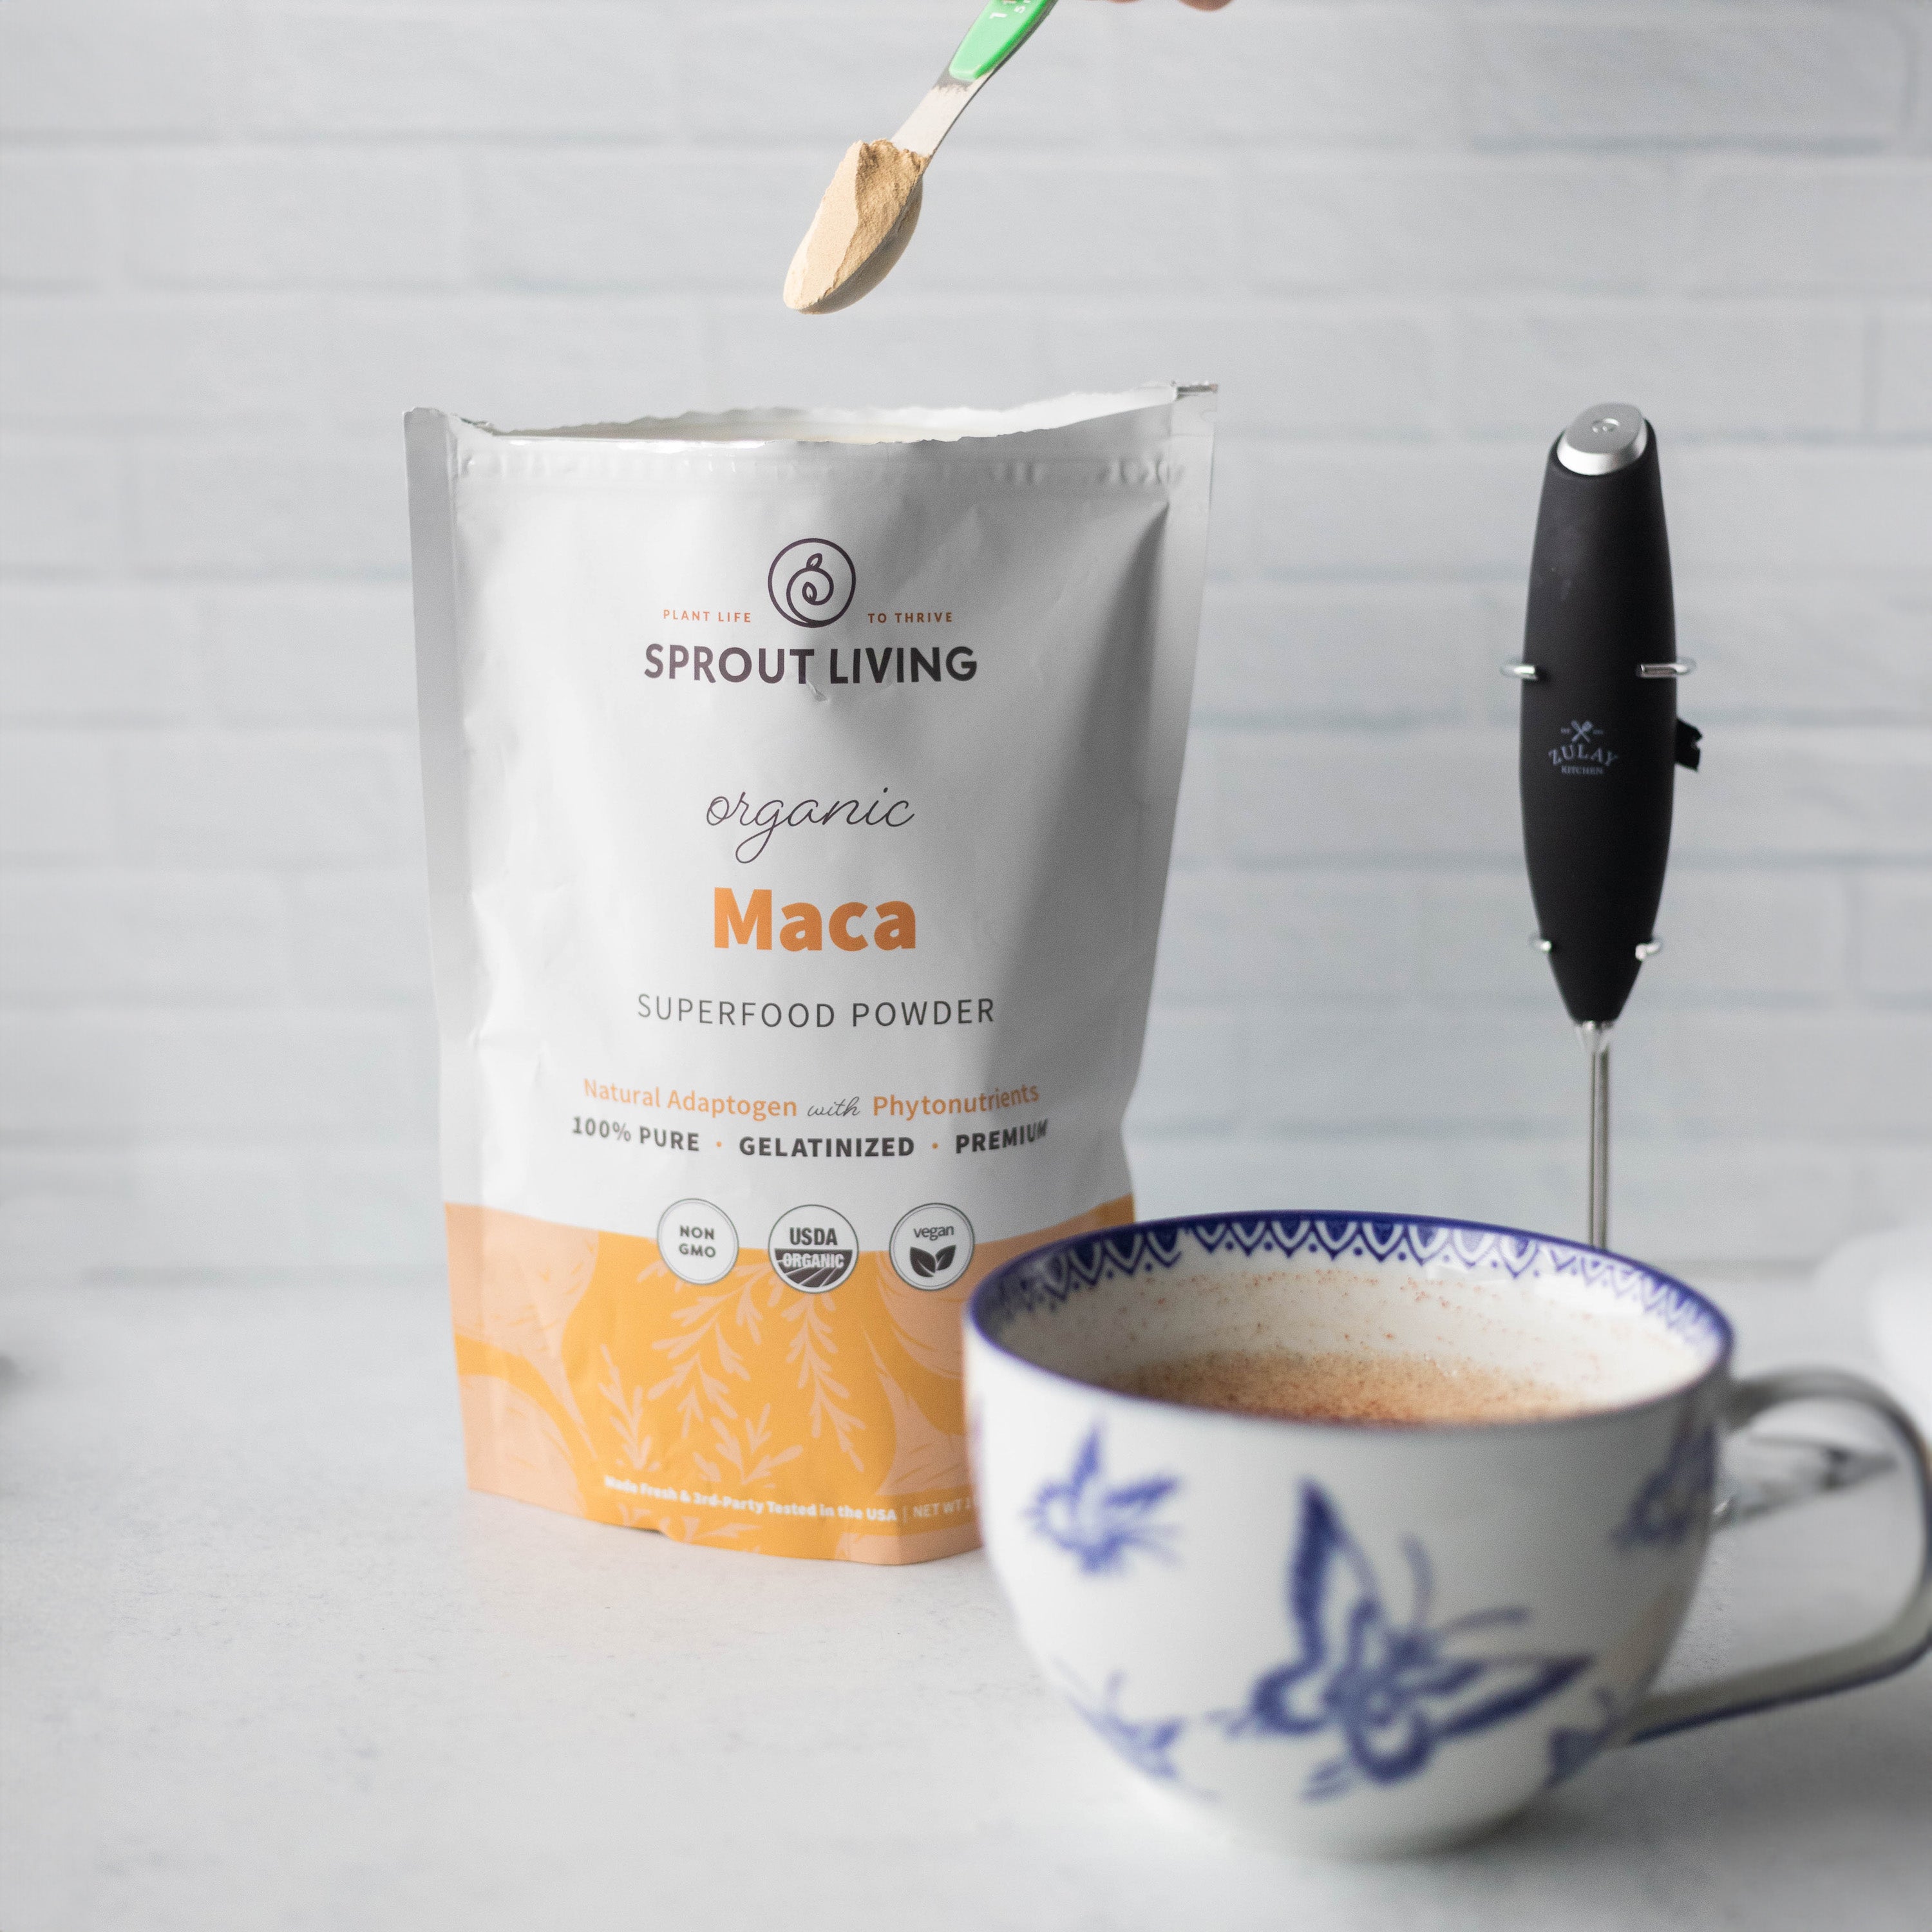 Maca Superfood Powder and Latte in Mug with Whisk